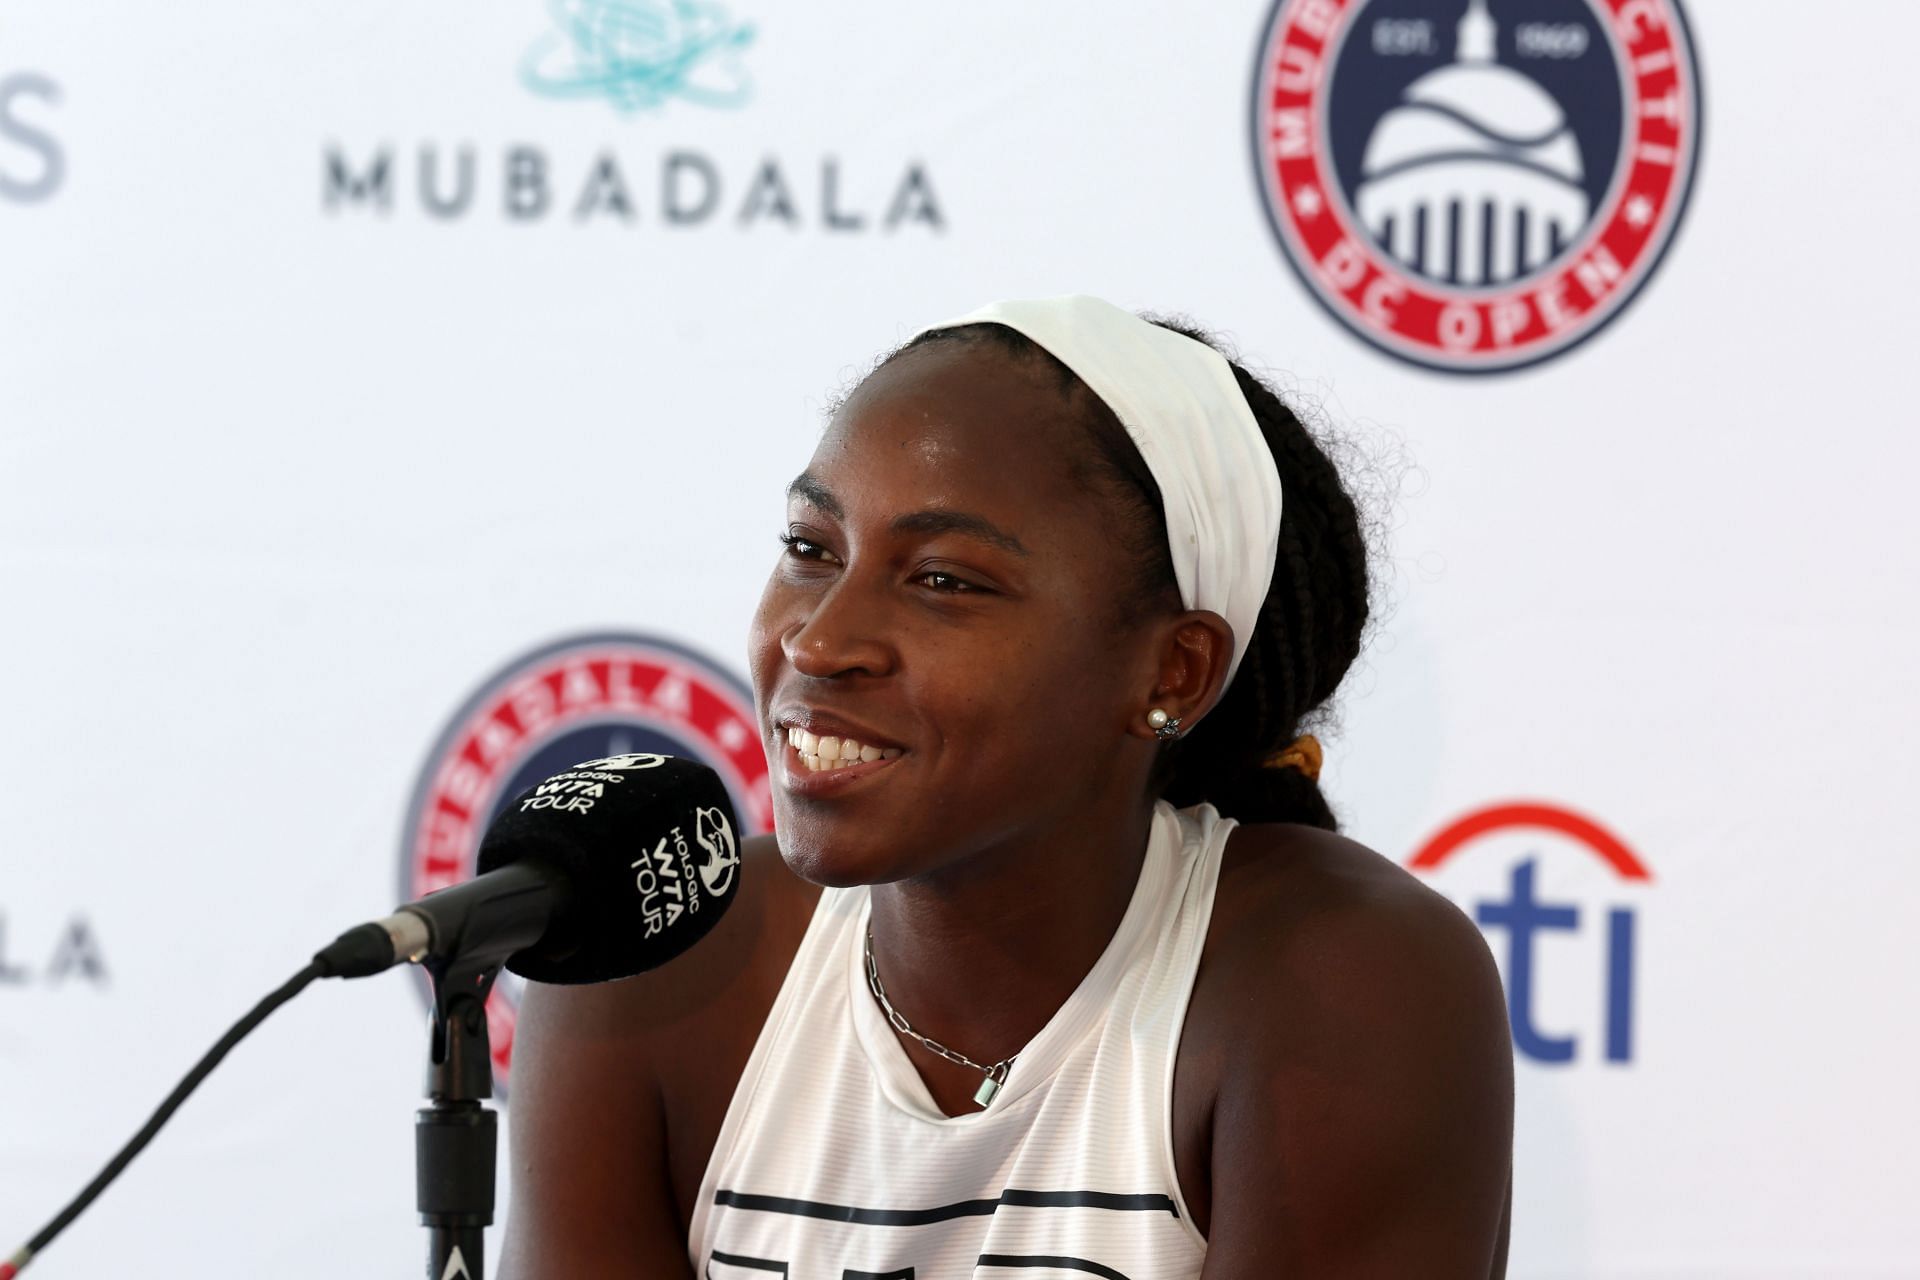 Coco Gauff speaks to the media at the Citi Open